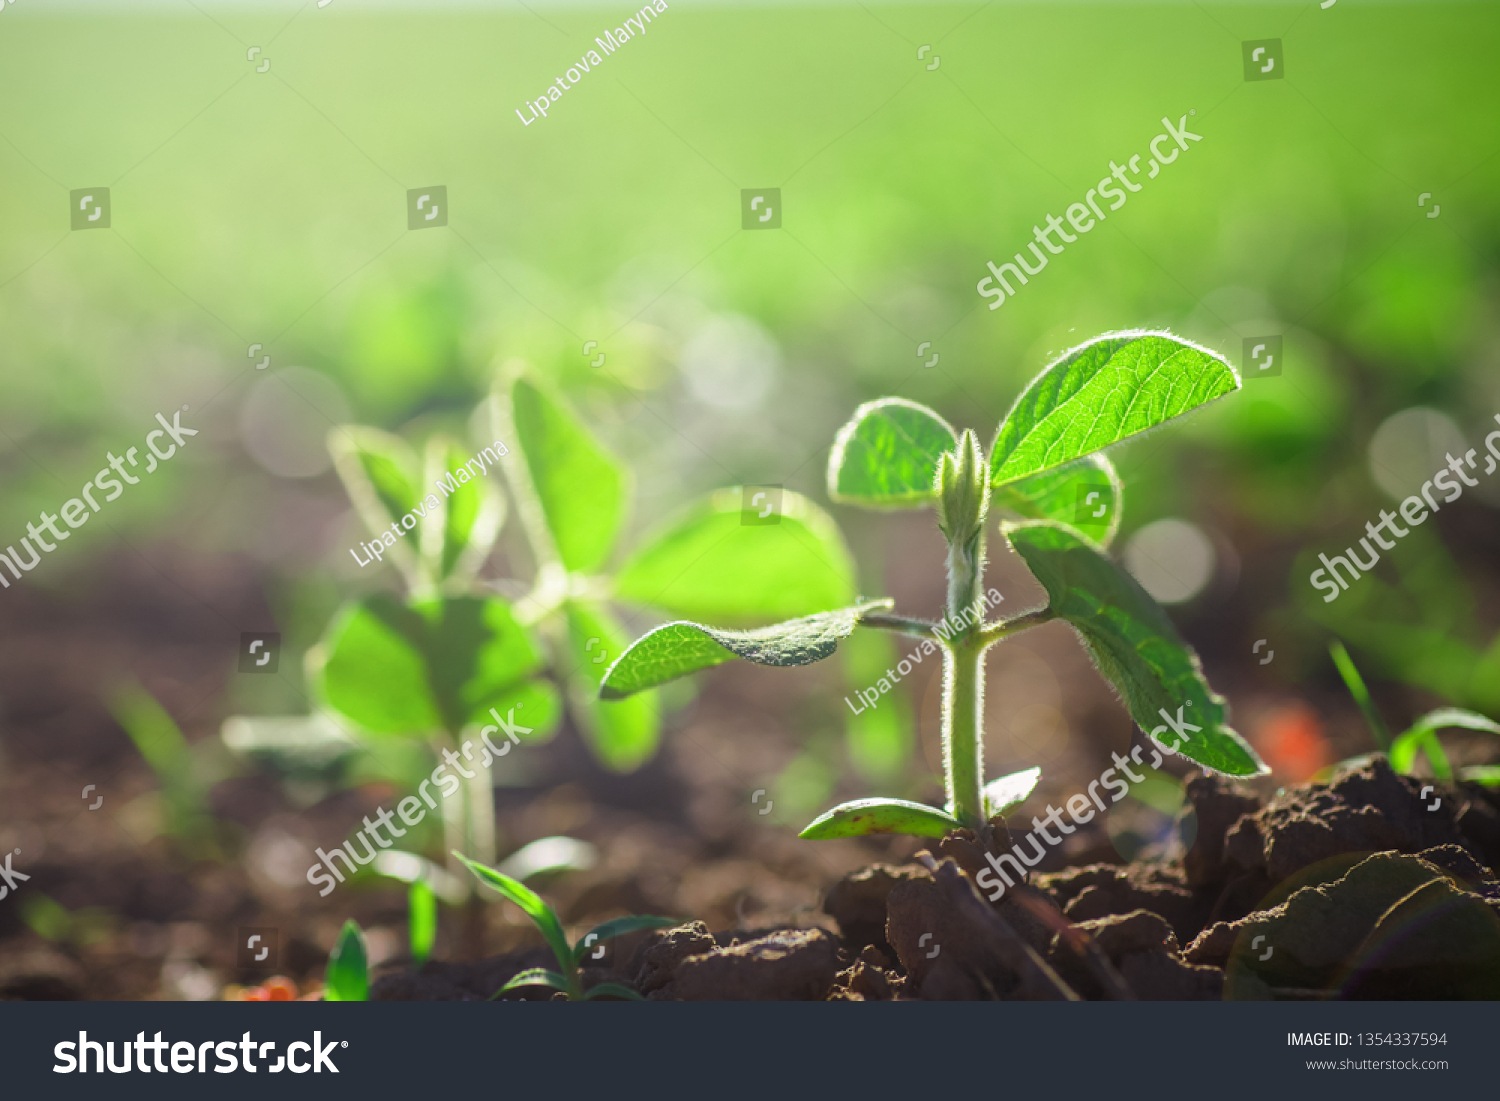 stock-photo-environment-earth-day-sustainable-environment-one-plant-glycine-max-soybean-soya-bean-sprout-1354337594.jpg